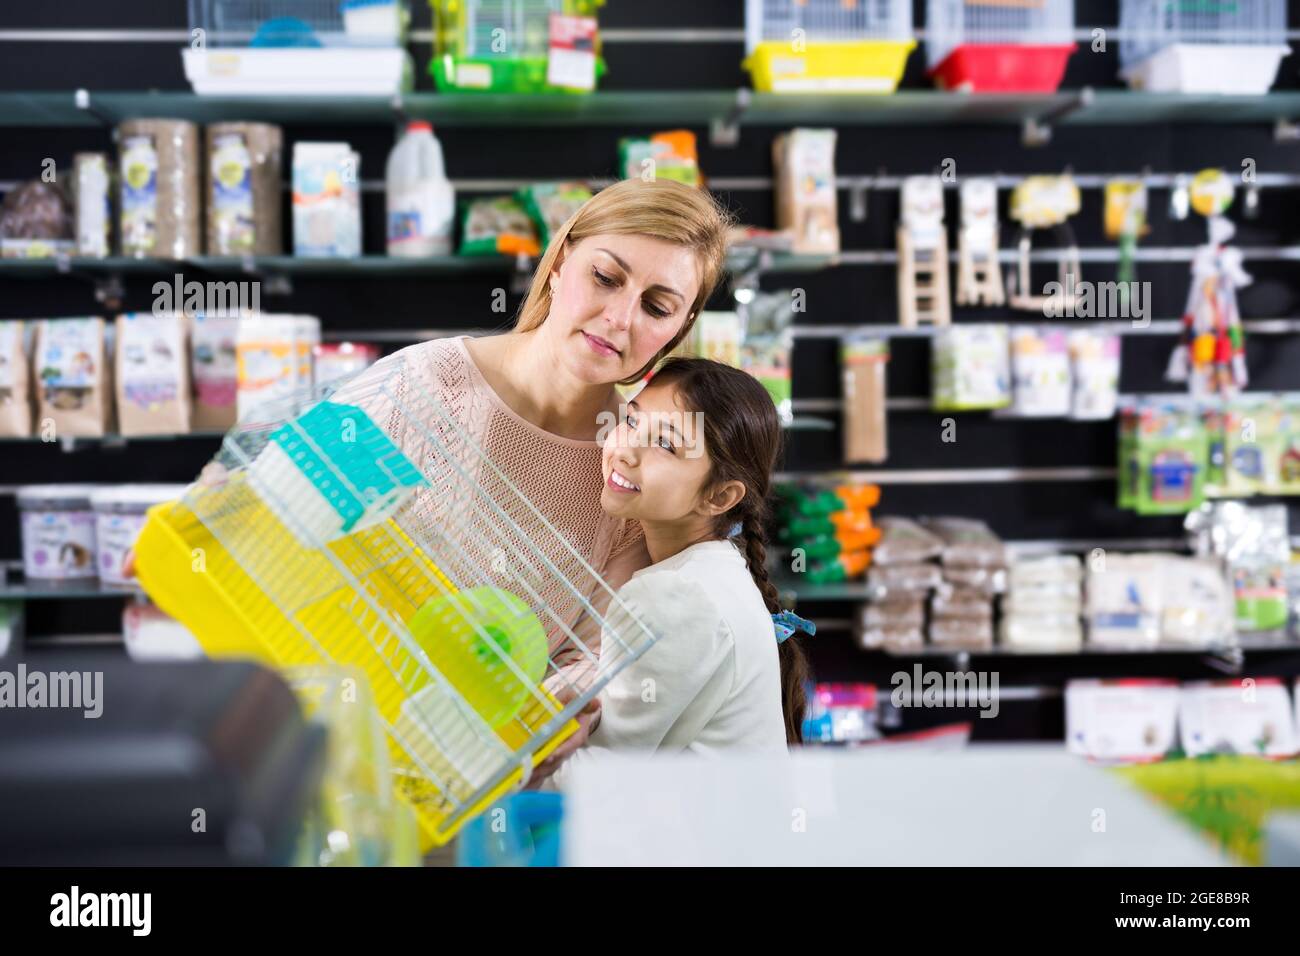 Smiling woman with her daughter choosing hamster cage Stock Photo